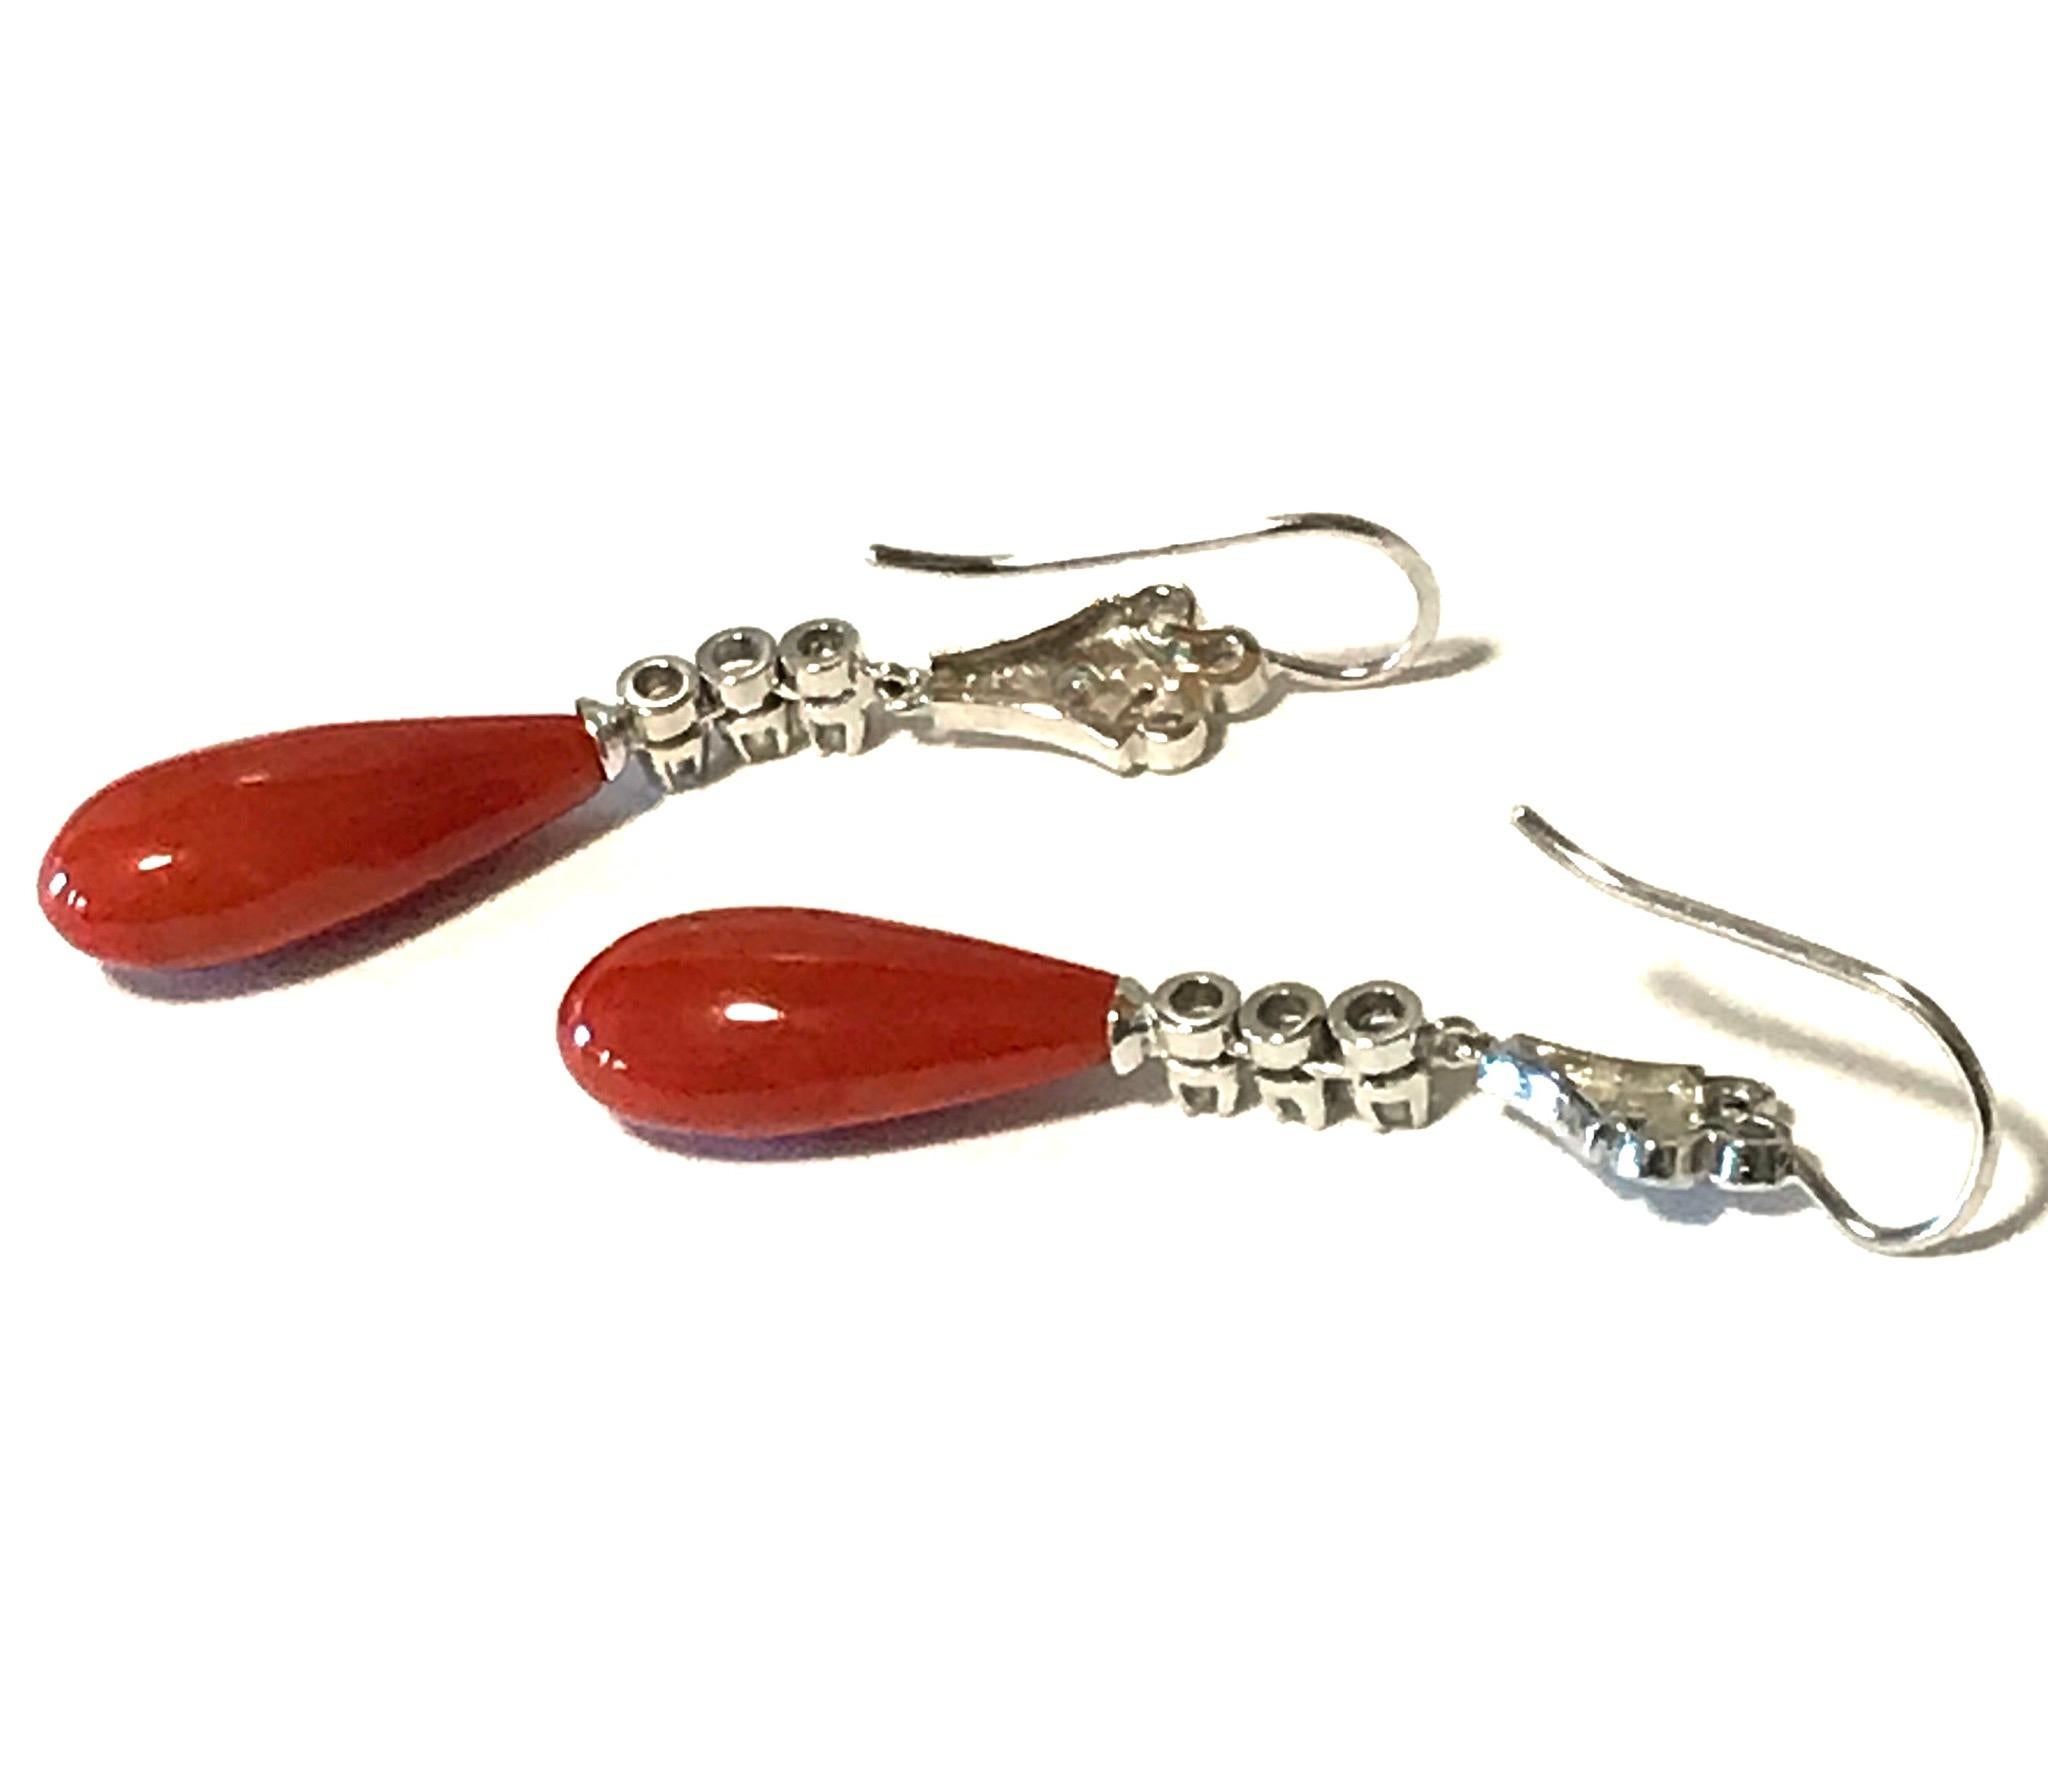 Art Deco coral and diamond drop earrings. Natural corals are of a vivid oxblood color and measure 20mm long x 7mm and 8mm wide. Mixed cut diamonds weigh .50 dtw. and are set in platinum.
In great antique condition with age-appropriate wear and use.